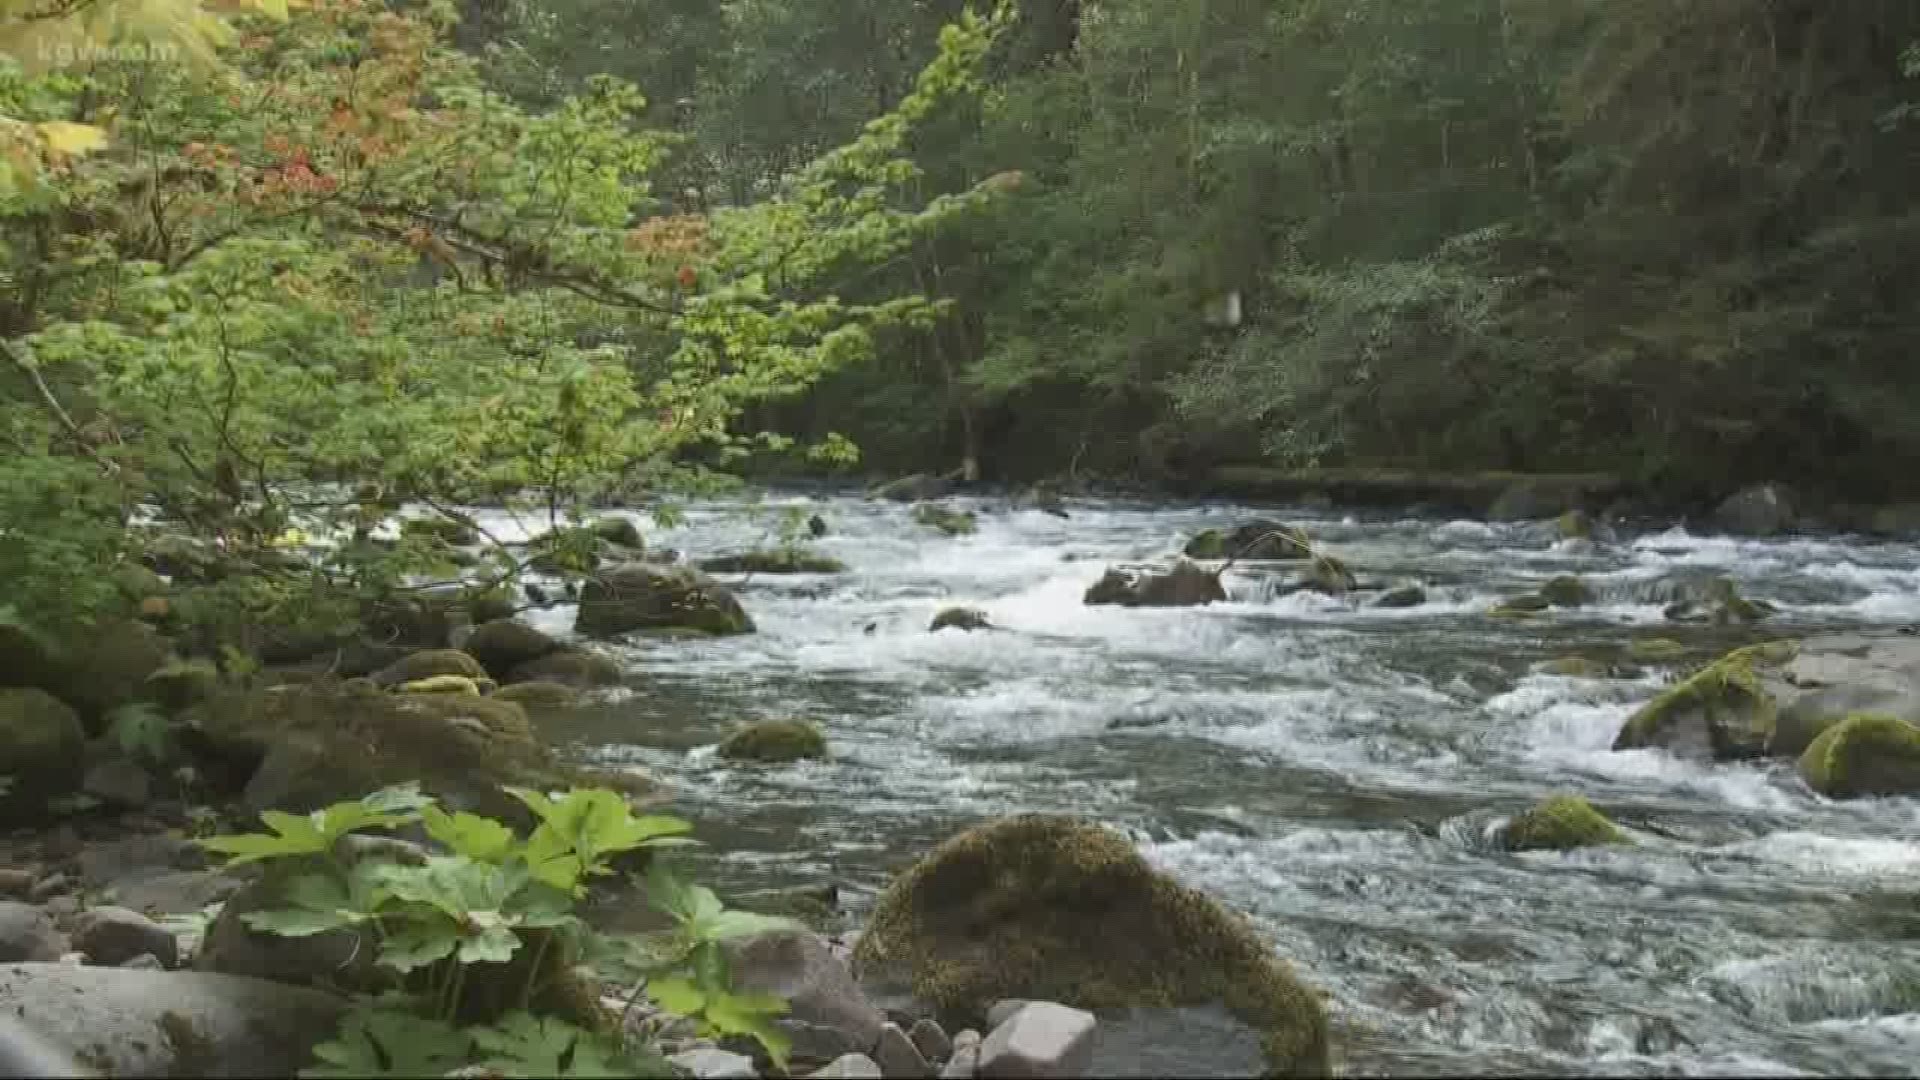 A babbling river, old growth forest, campgrounds galore. Grant McOmie takes us along one of Oregon's prettiest roads.